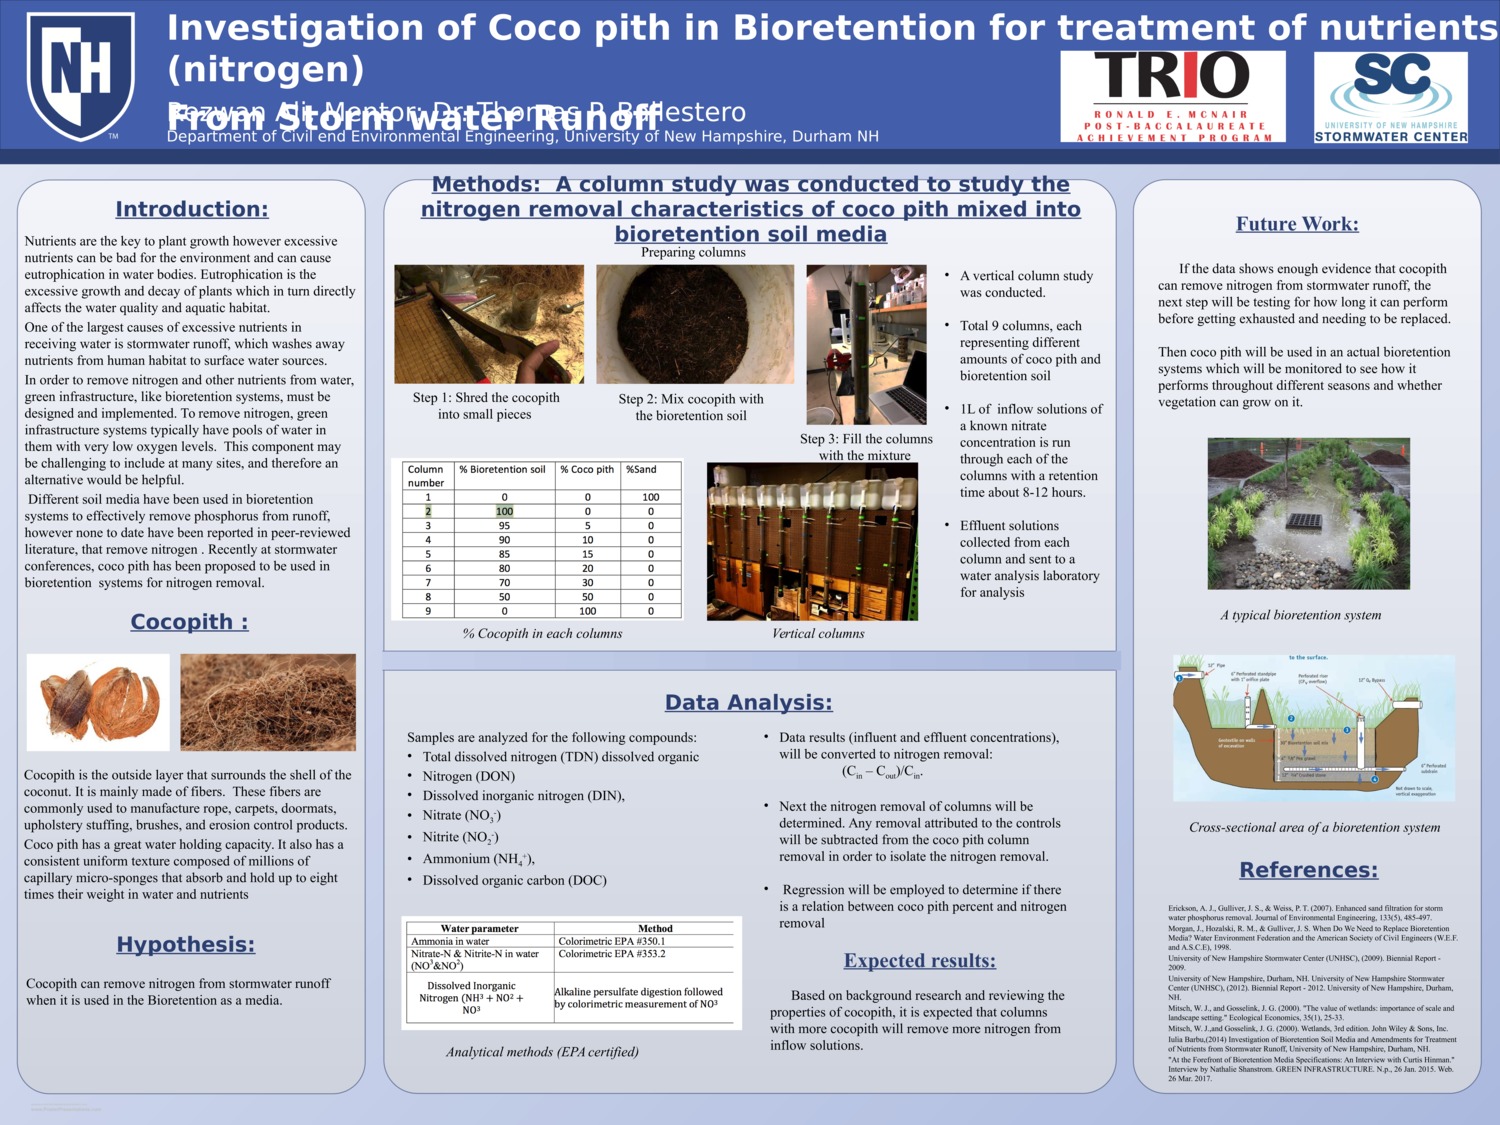 Investigation Of Coco Pith In Bioretention For Treatment Of Nutrients (Nitrogen)  From Storm Water Runoff by ra1o25